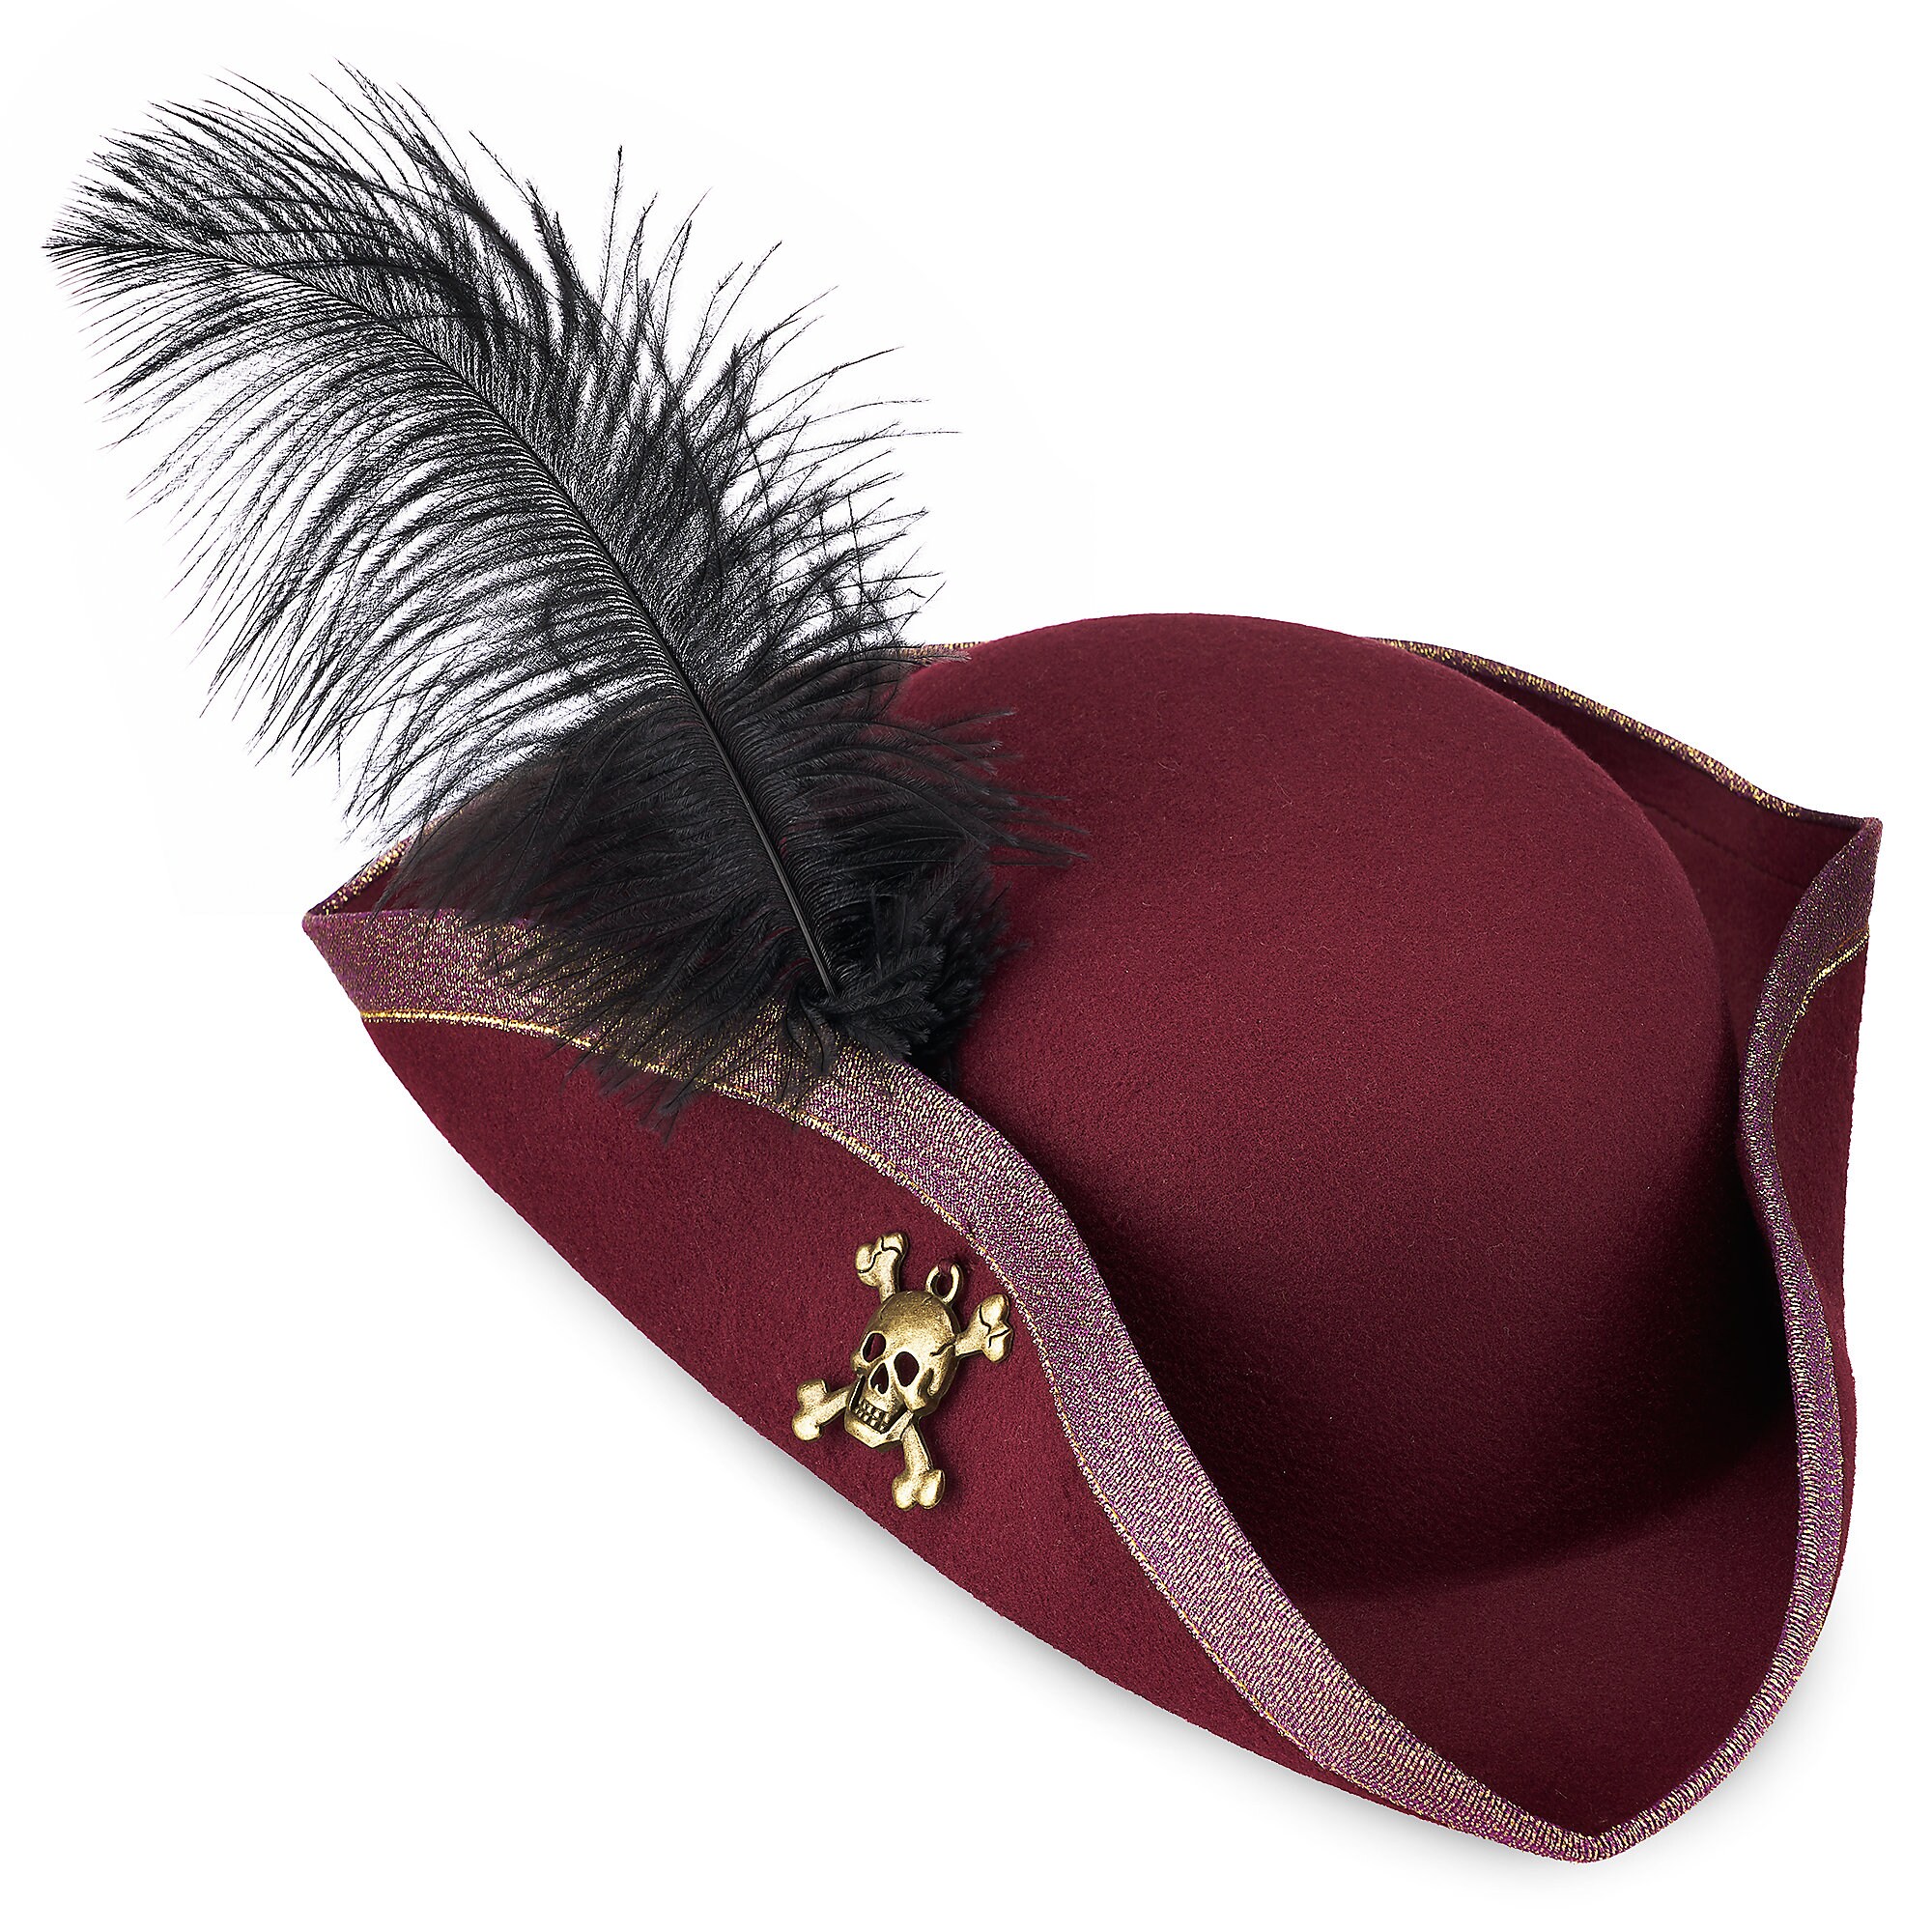 Redd Pirate Hat for Adults - Pirates of the Caribbean